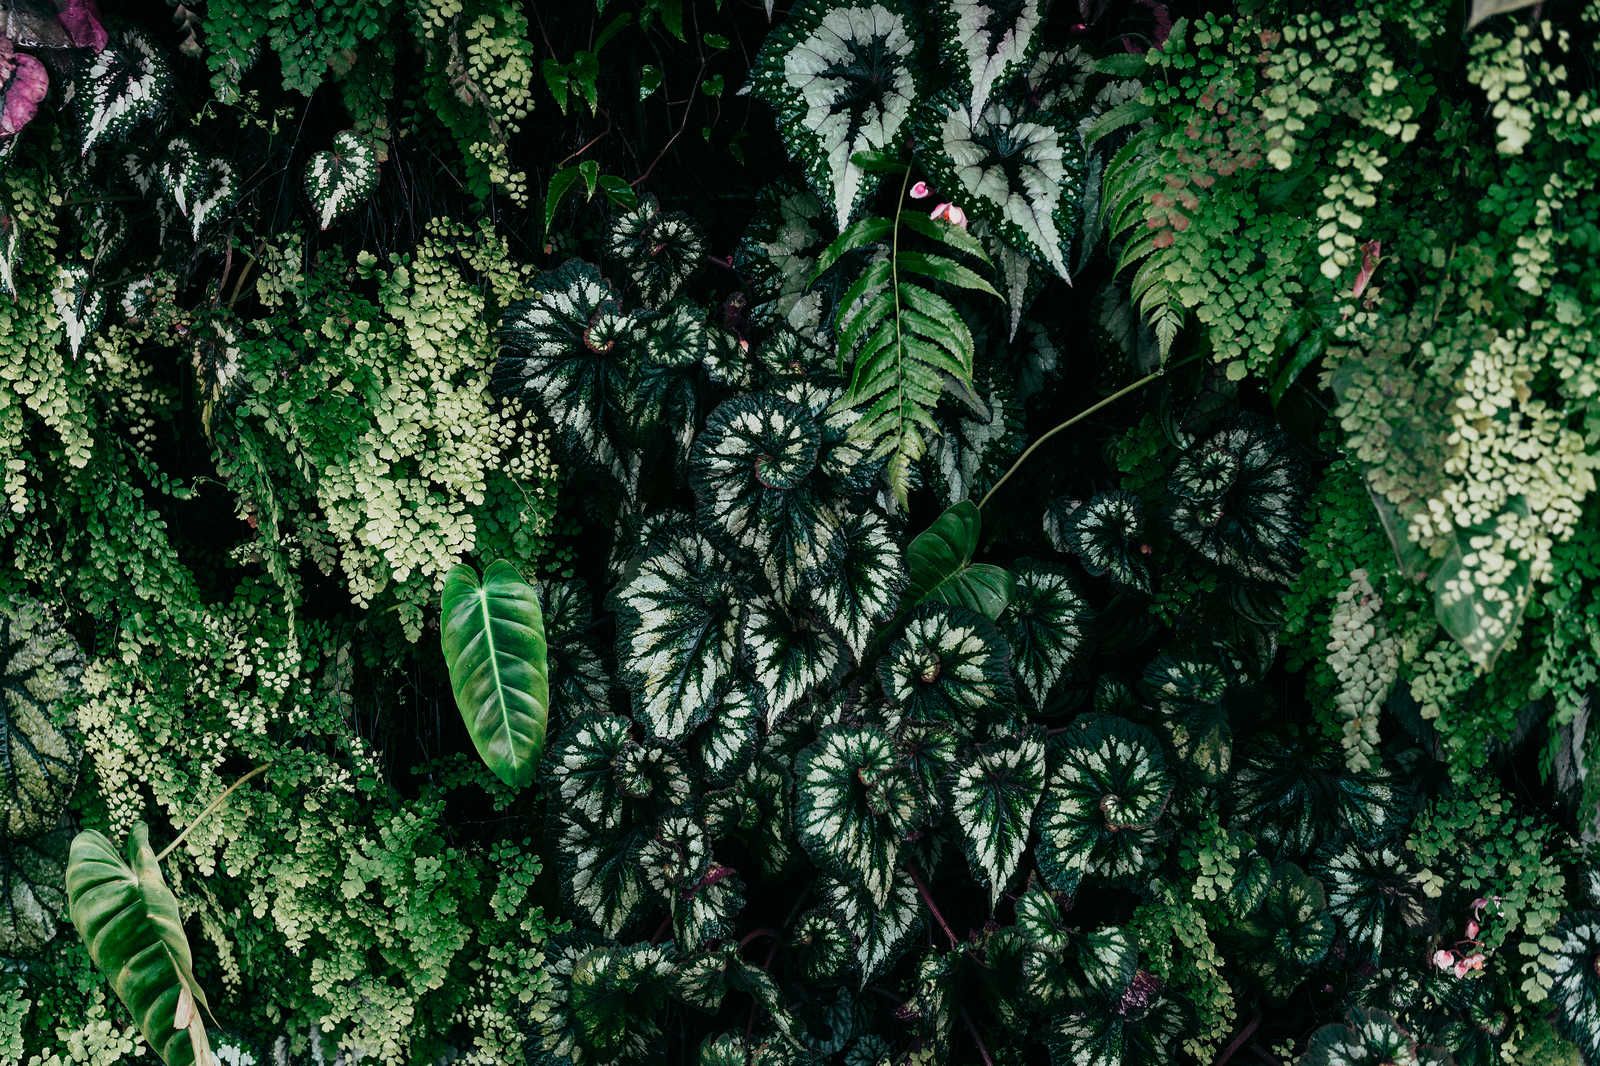             Deep Green 2 - Canvas painting Foliage thicket, ferns & hanging plants - 0.90 m x 0.60 m
        